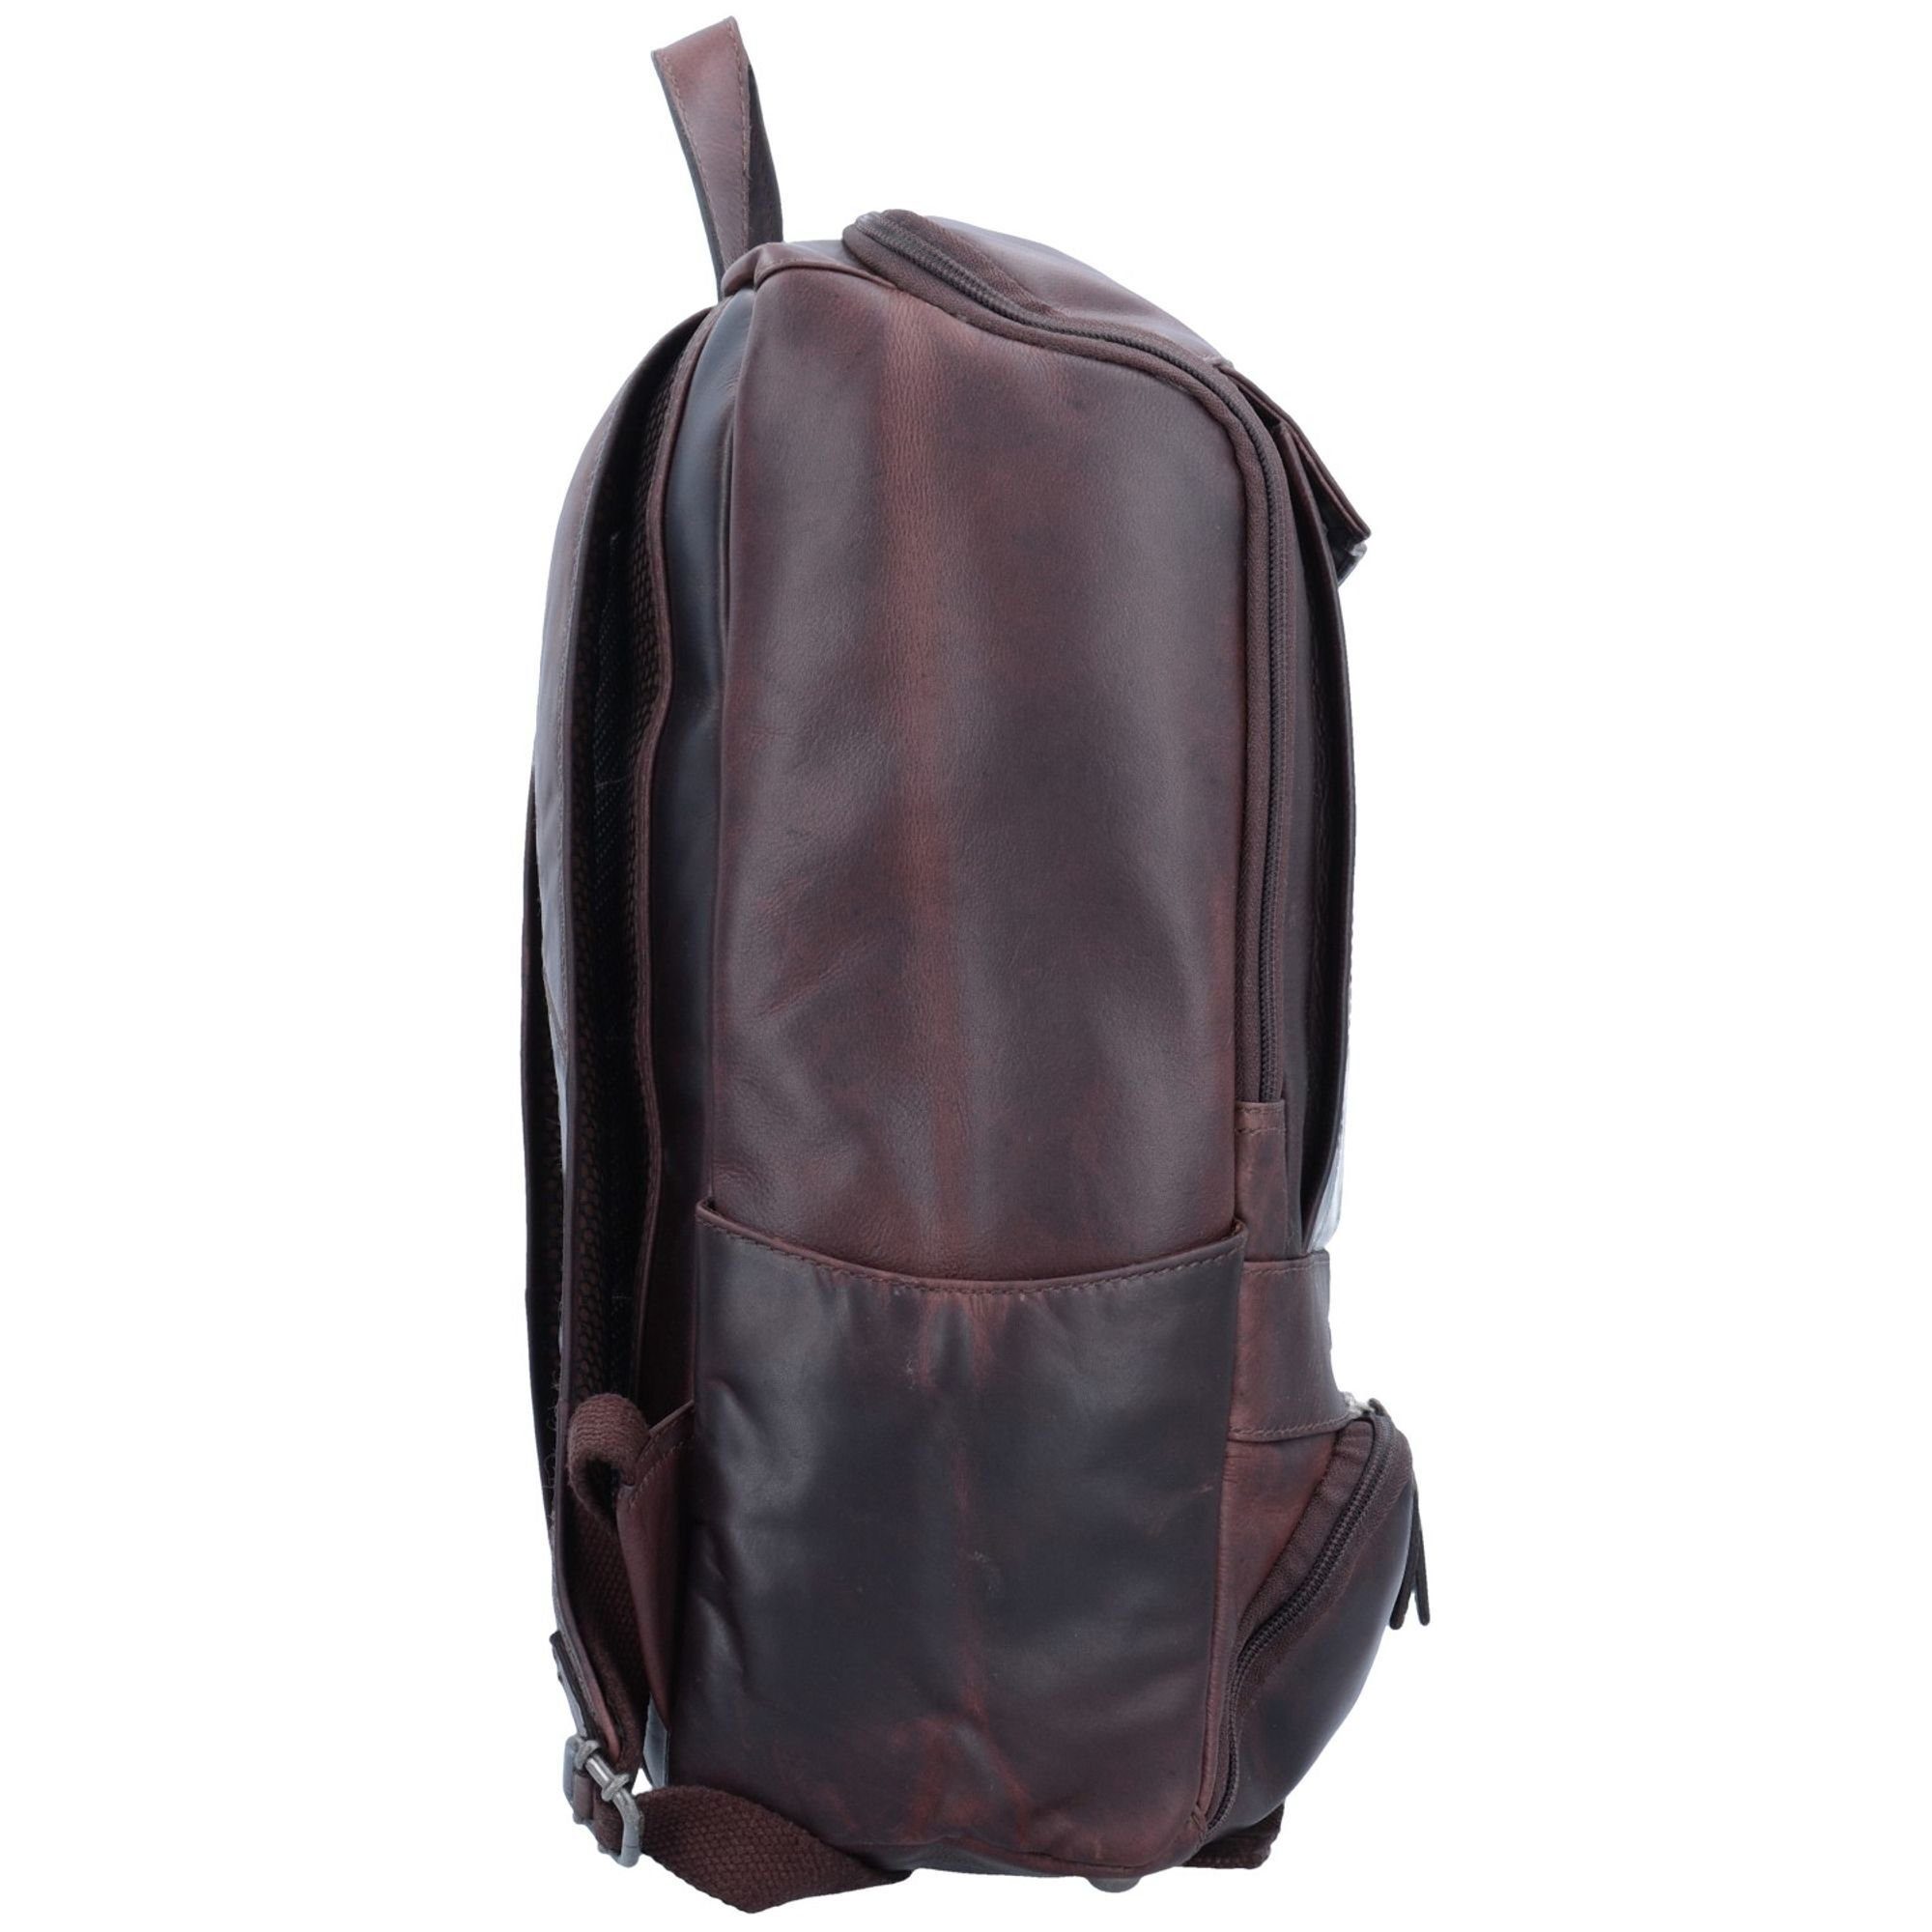 Laptoprucksack Brand Leder The brown Up, Wax Chesterfield Pull